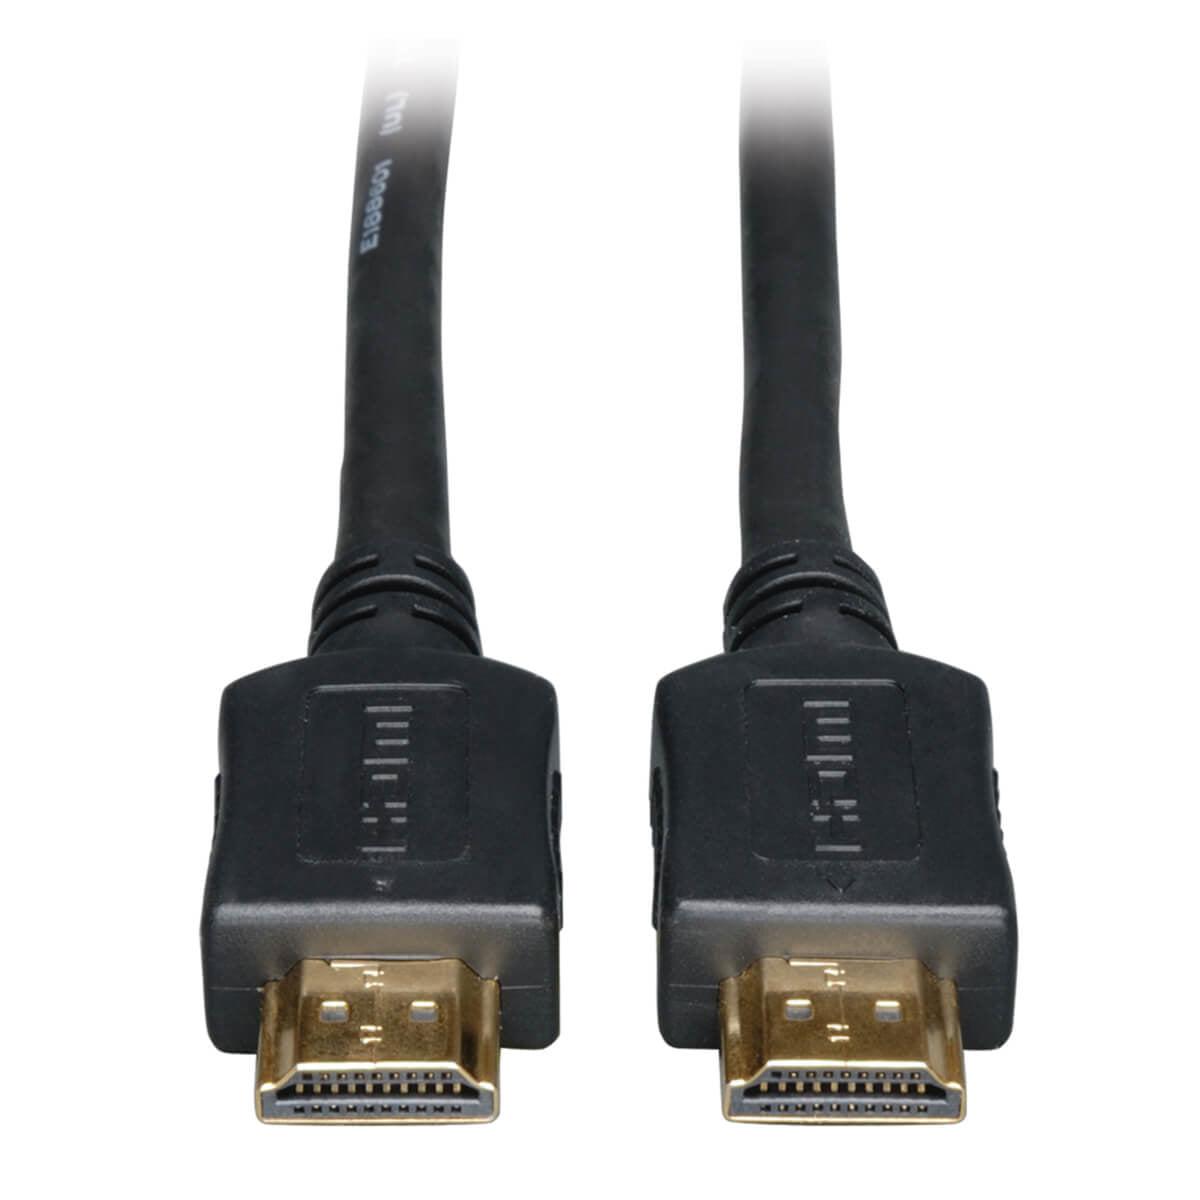 Tripp Lite P568-045-Hd High-Speed Hdmi Cable With Ethernet (M/M) - 4K, No Signal Booster Needed, Black, 45 Ft.